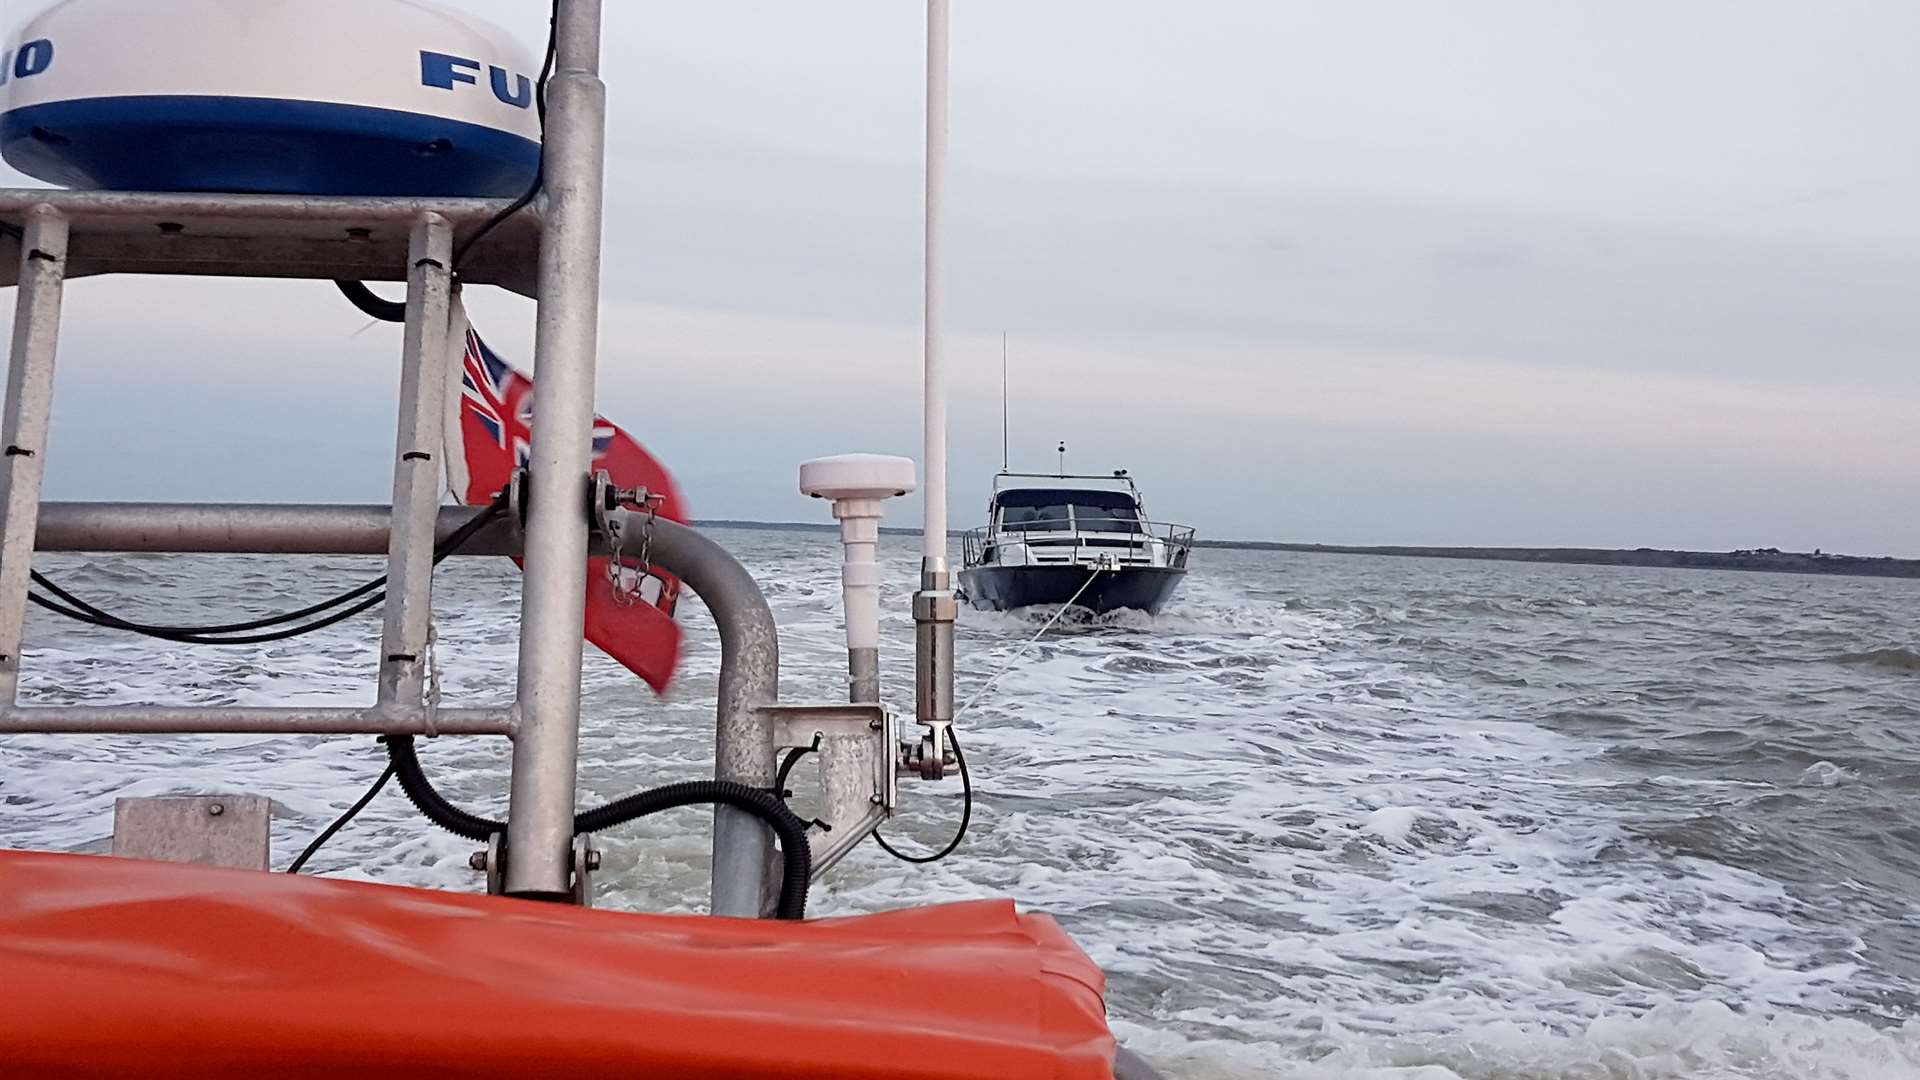 The boat was rescued off Herne Bay